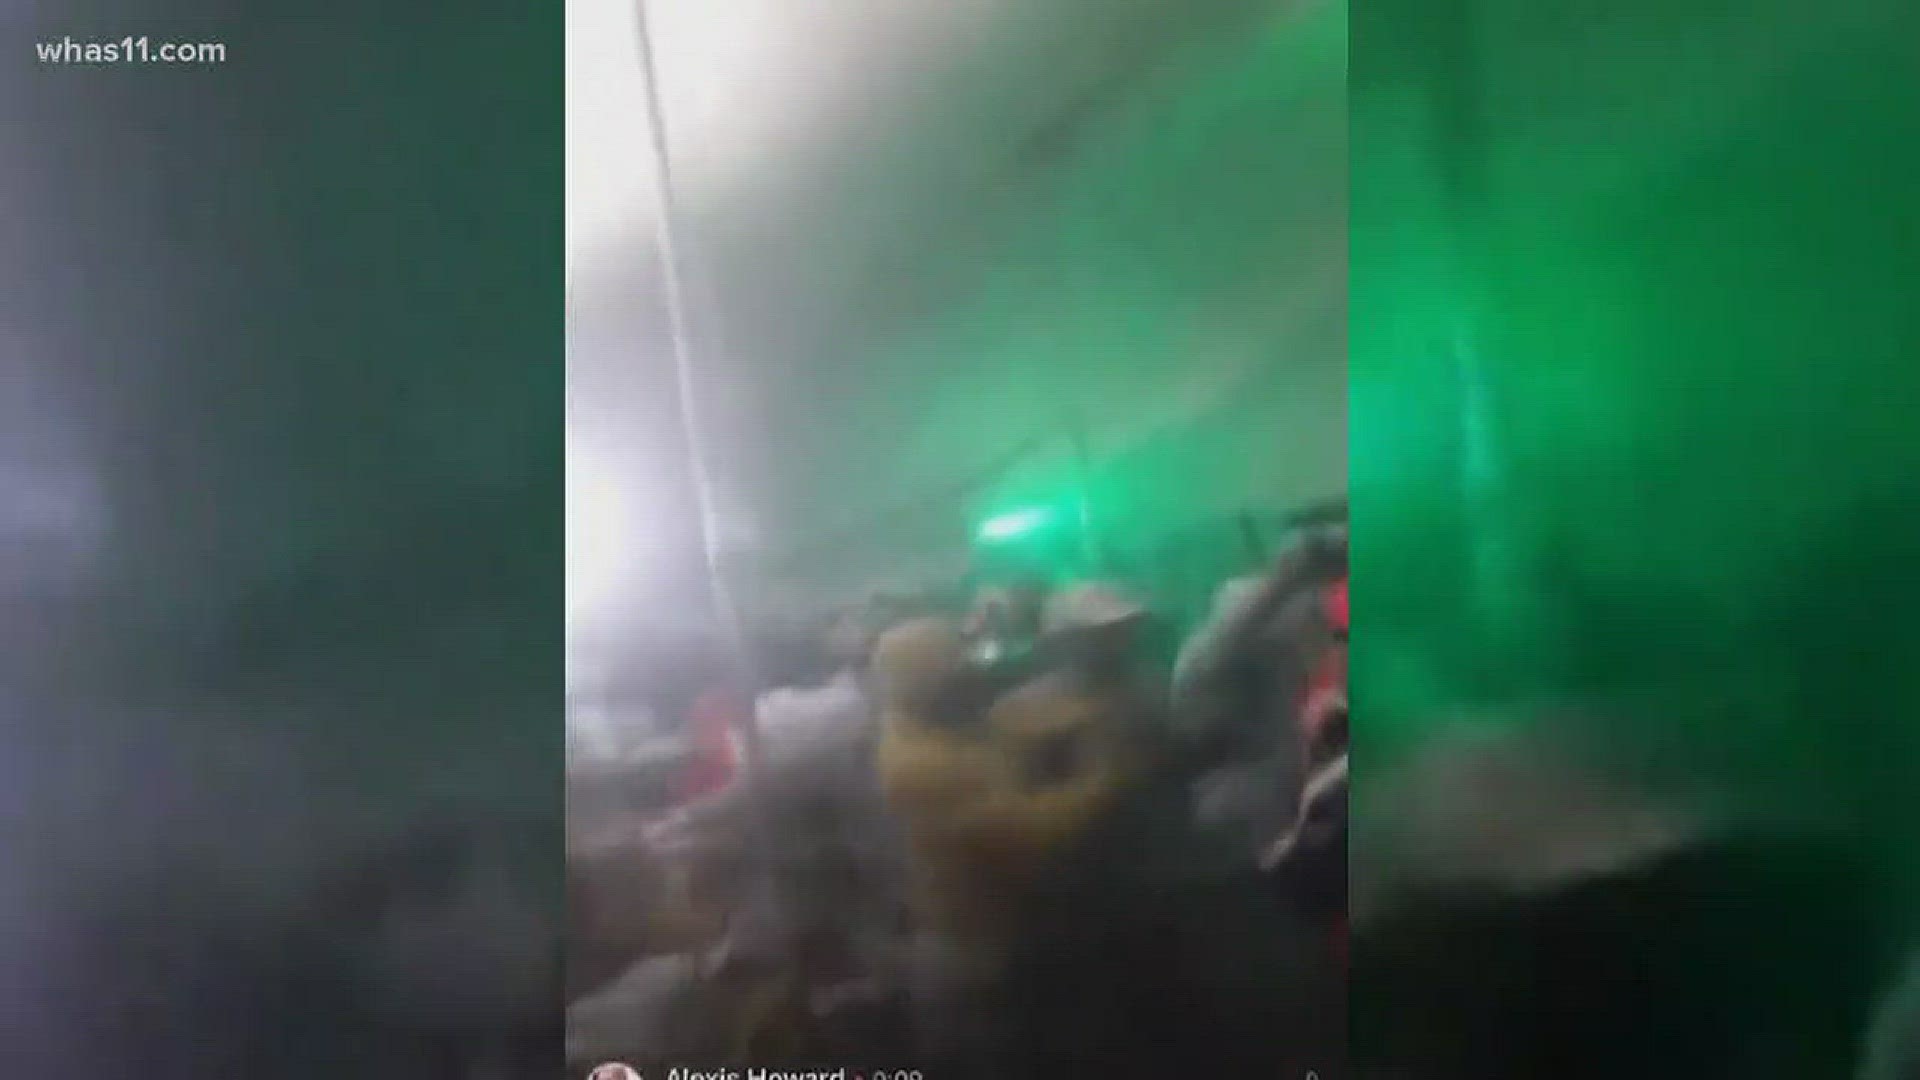 It was a Louisville nightclub shooting caught on camera, several people injured in the chaos at Cole's Place in the Parkland Neighborhood.